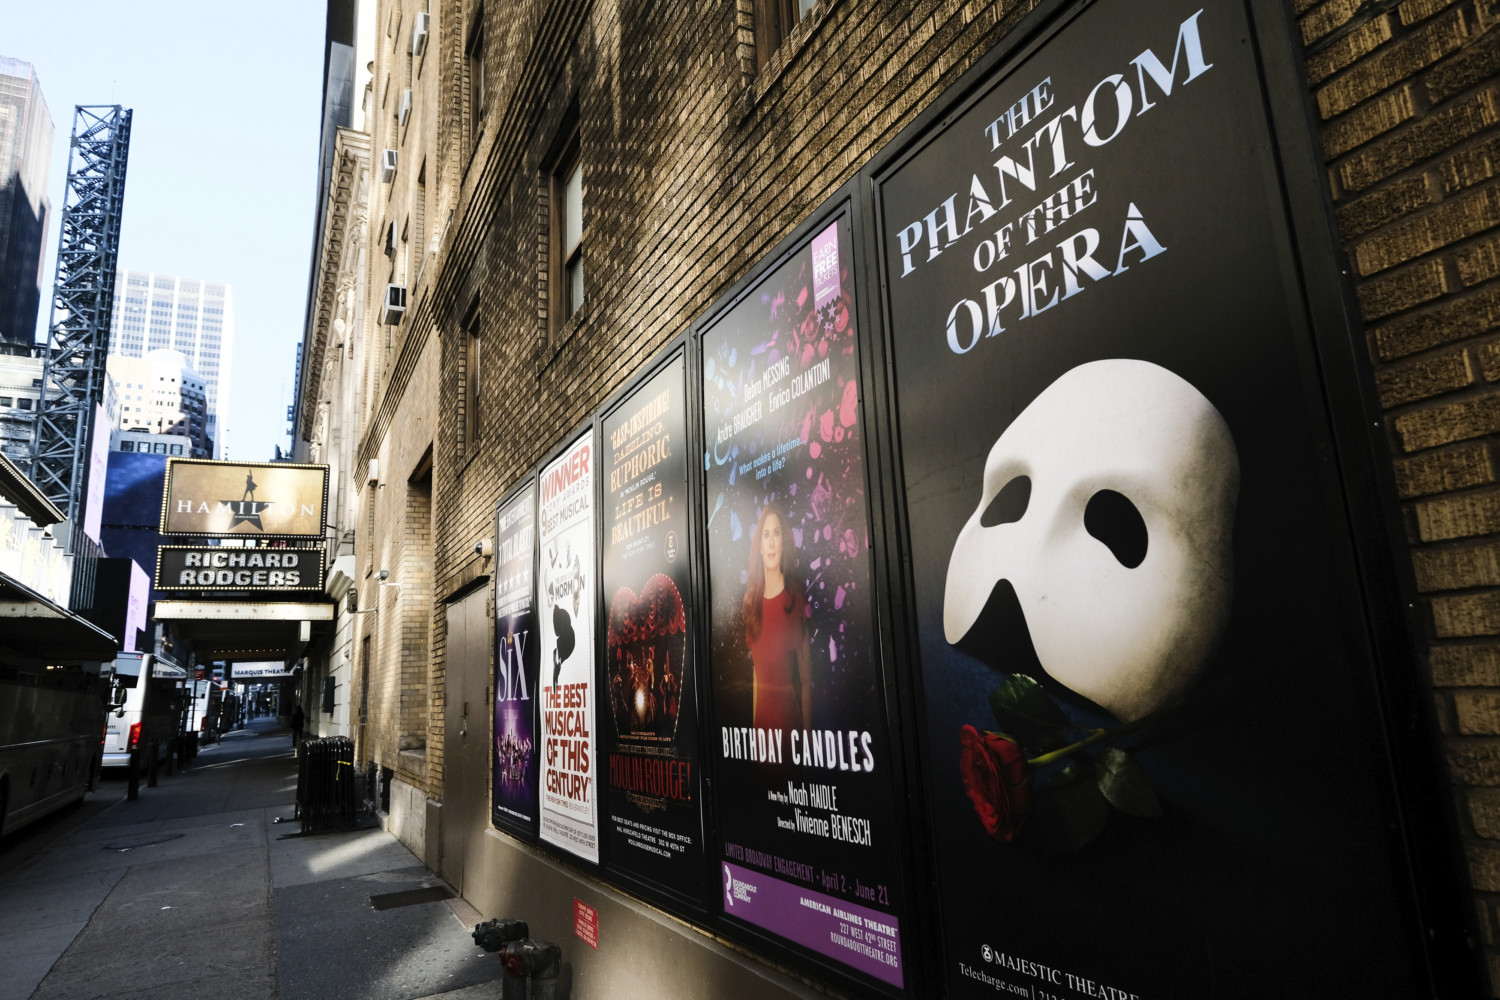 Broadway reopening: Posters show Broadway shows